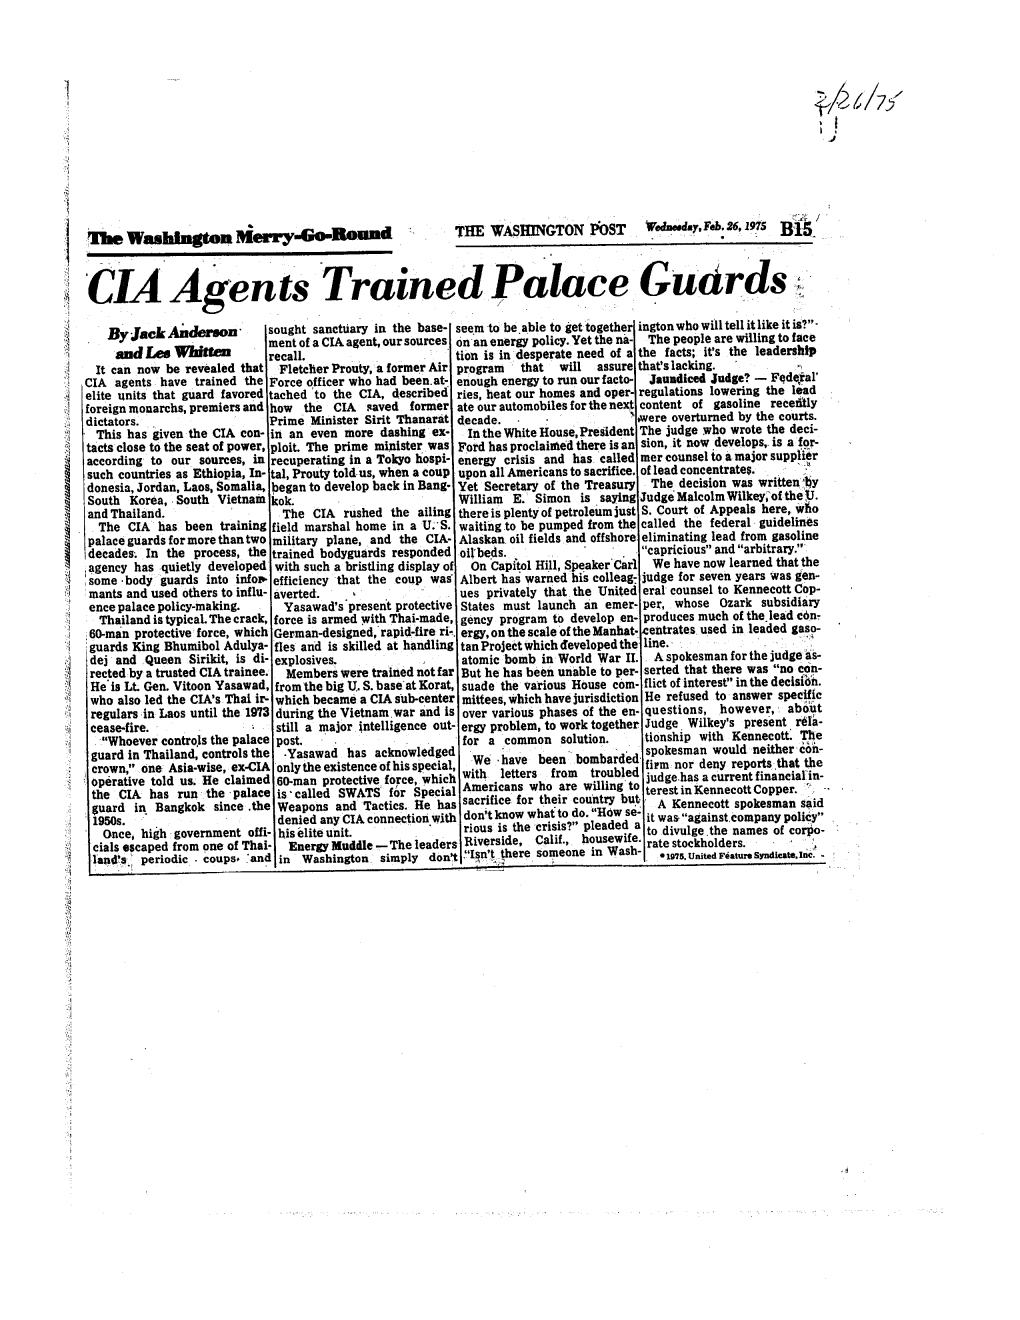 CIA Agents Trained Palace Guards